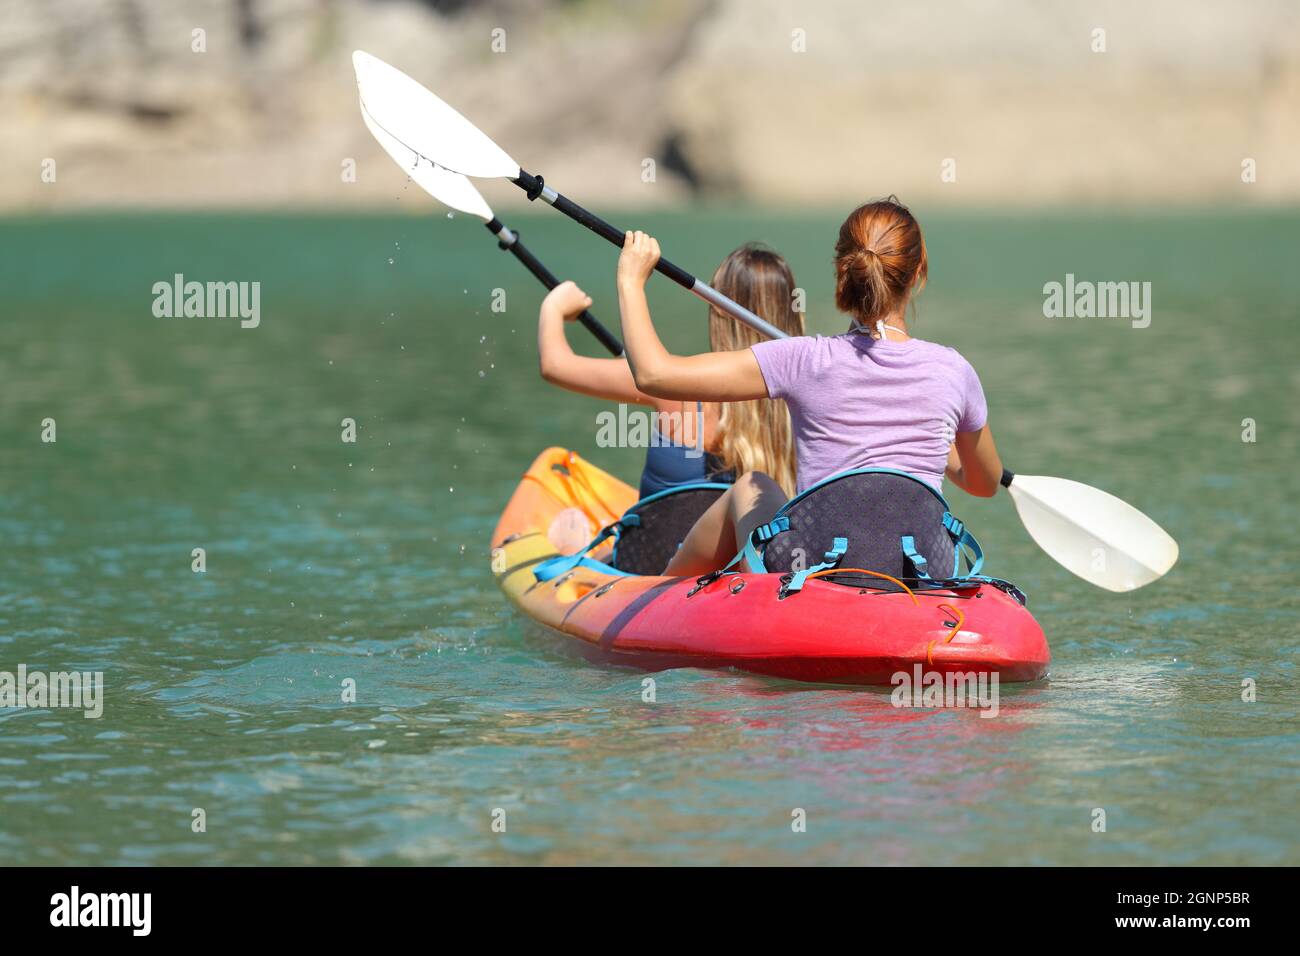 Back view portrait of two women rowing in a tandem kayak in a lake Stock Photo